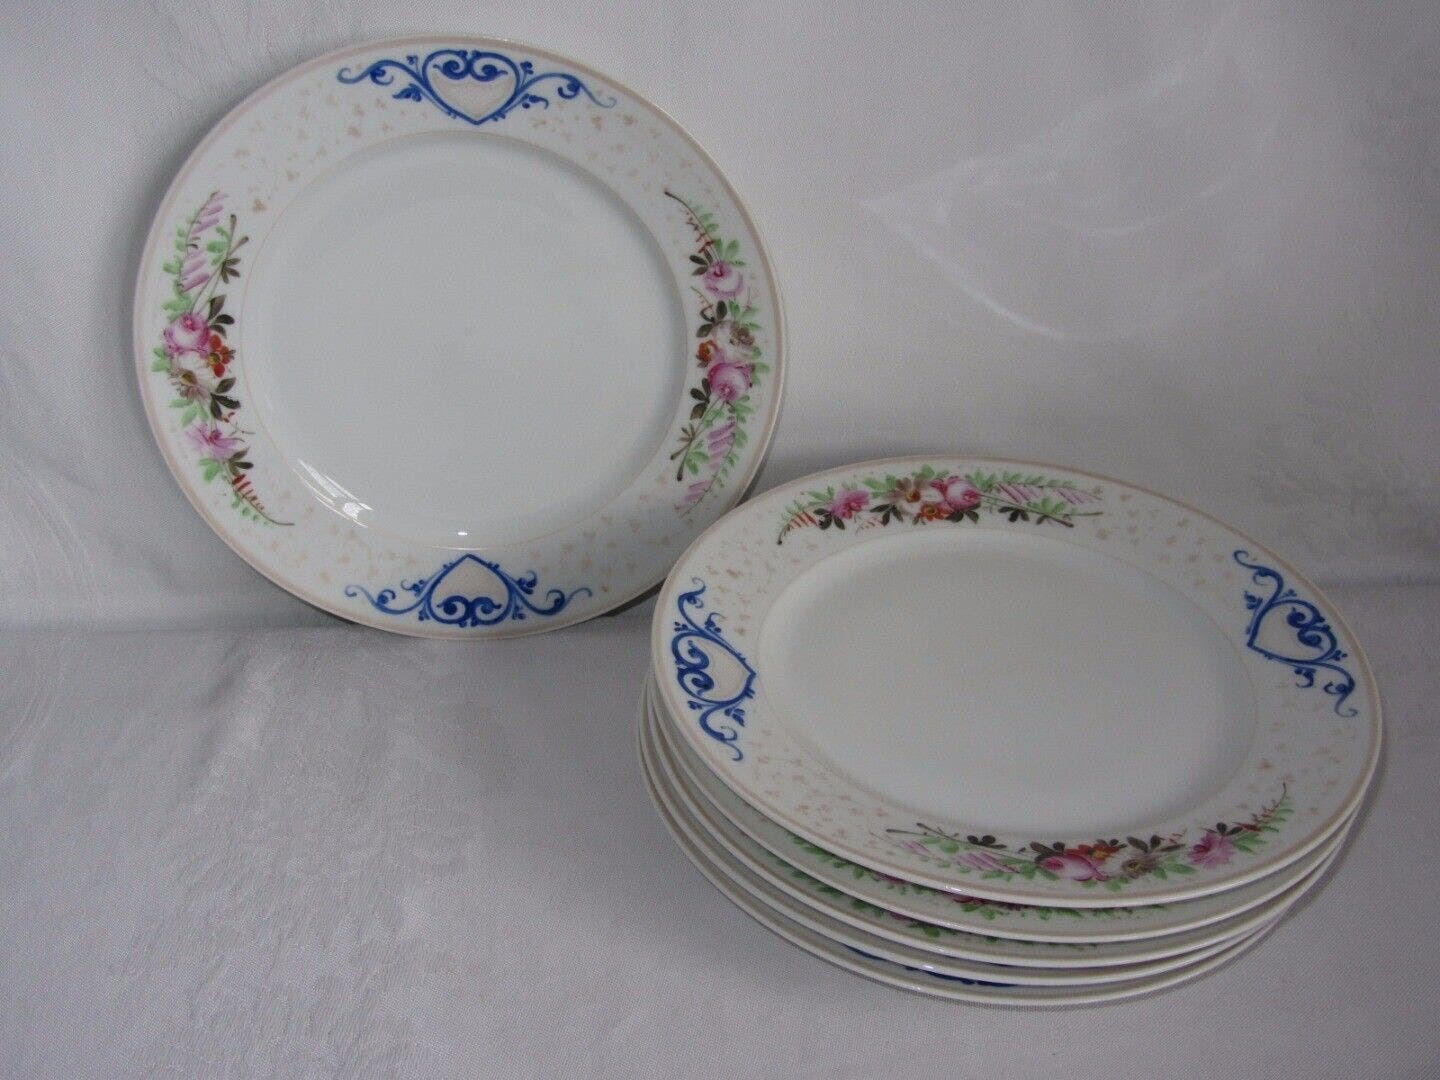 Primary image for Vtg Set of 6 Hand Painted Ceramic Dinner Plates White Pink Floral Blue Heart